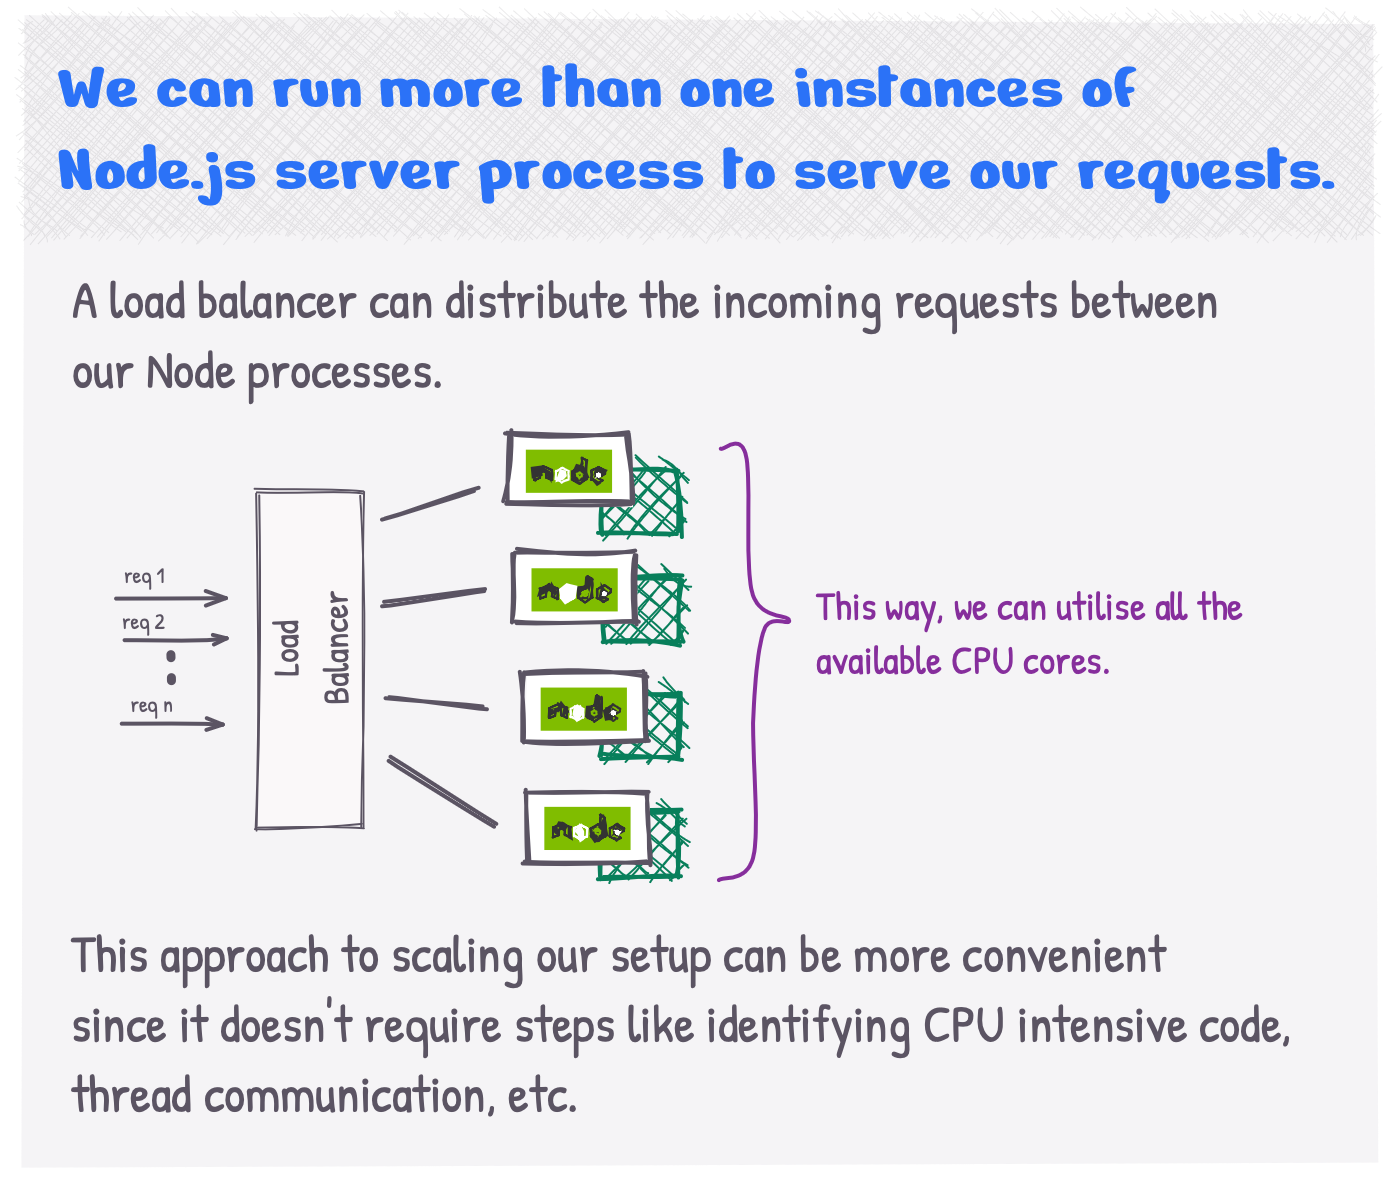 We can run more than one instances of the Node.js server